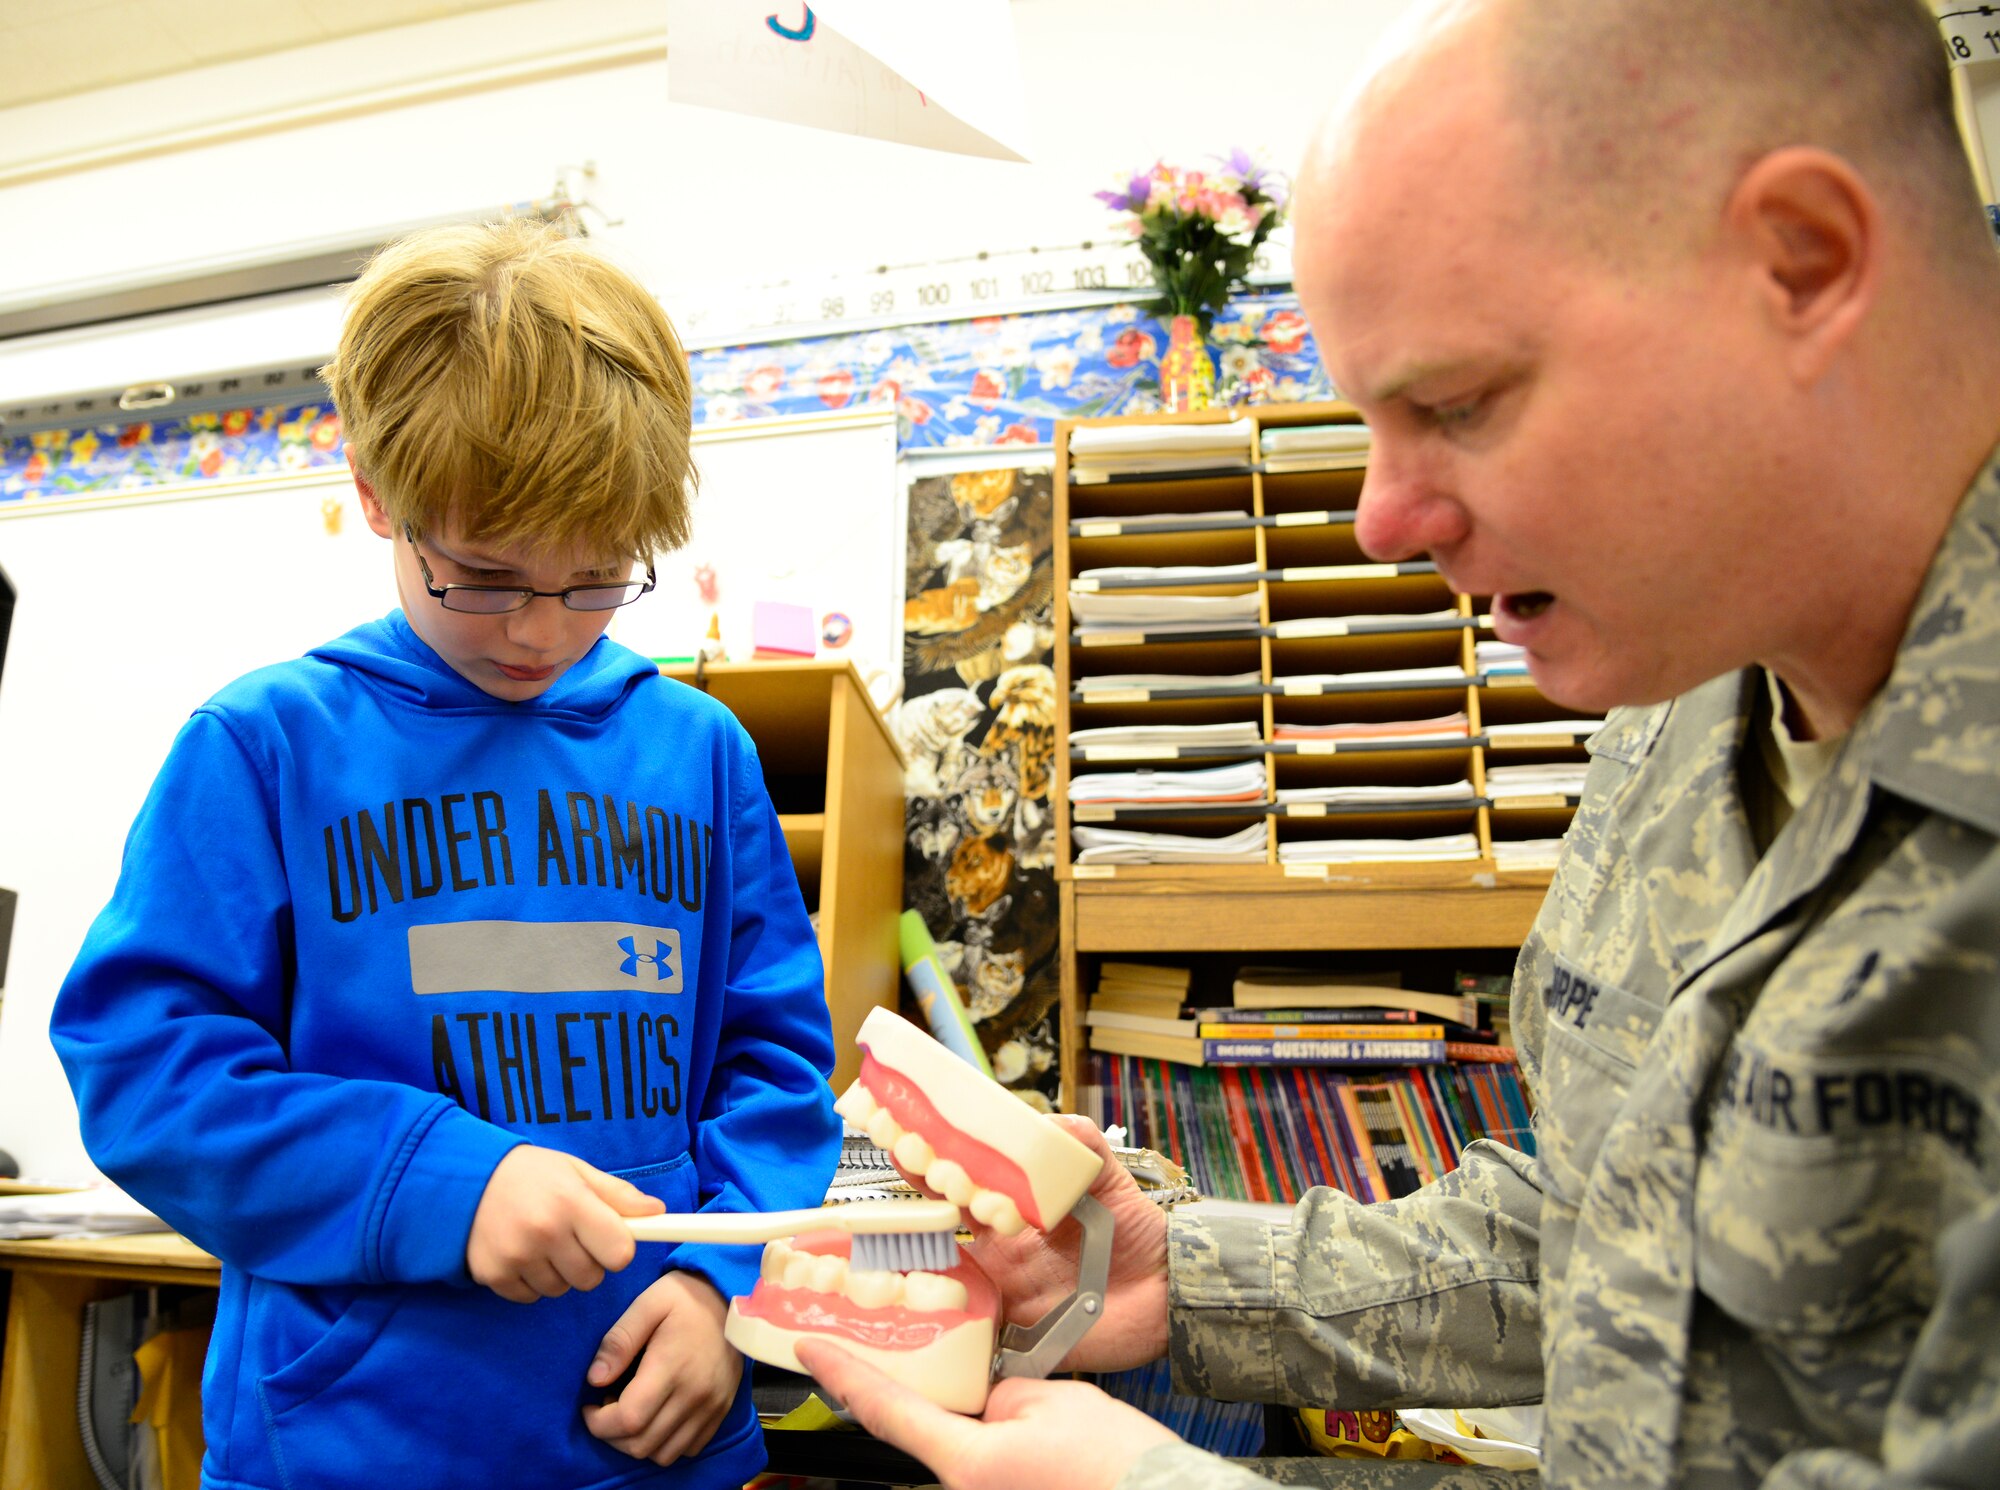 Brecken Thorpe, a dental health month participant, shows his father U.S. Air Force Master Sgt. Richard Thorpe, the 354th Medical Operations Squadron dental flight chief, how to brush during a National Children’s Dental Health month demonstration at Anderson Elementary, Eielson Air Force Base, Alaska, Feb. 10, 2015. Icemen from the dental office explained the importance of staying away from sugary foods, eating a healthy diet, how toothpaste is a vitamin for teeth and gave brushing and flossing techniques. (U.S. Air Force photo by Senior Airman Racheal E. Watson/Released)